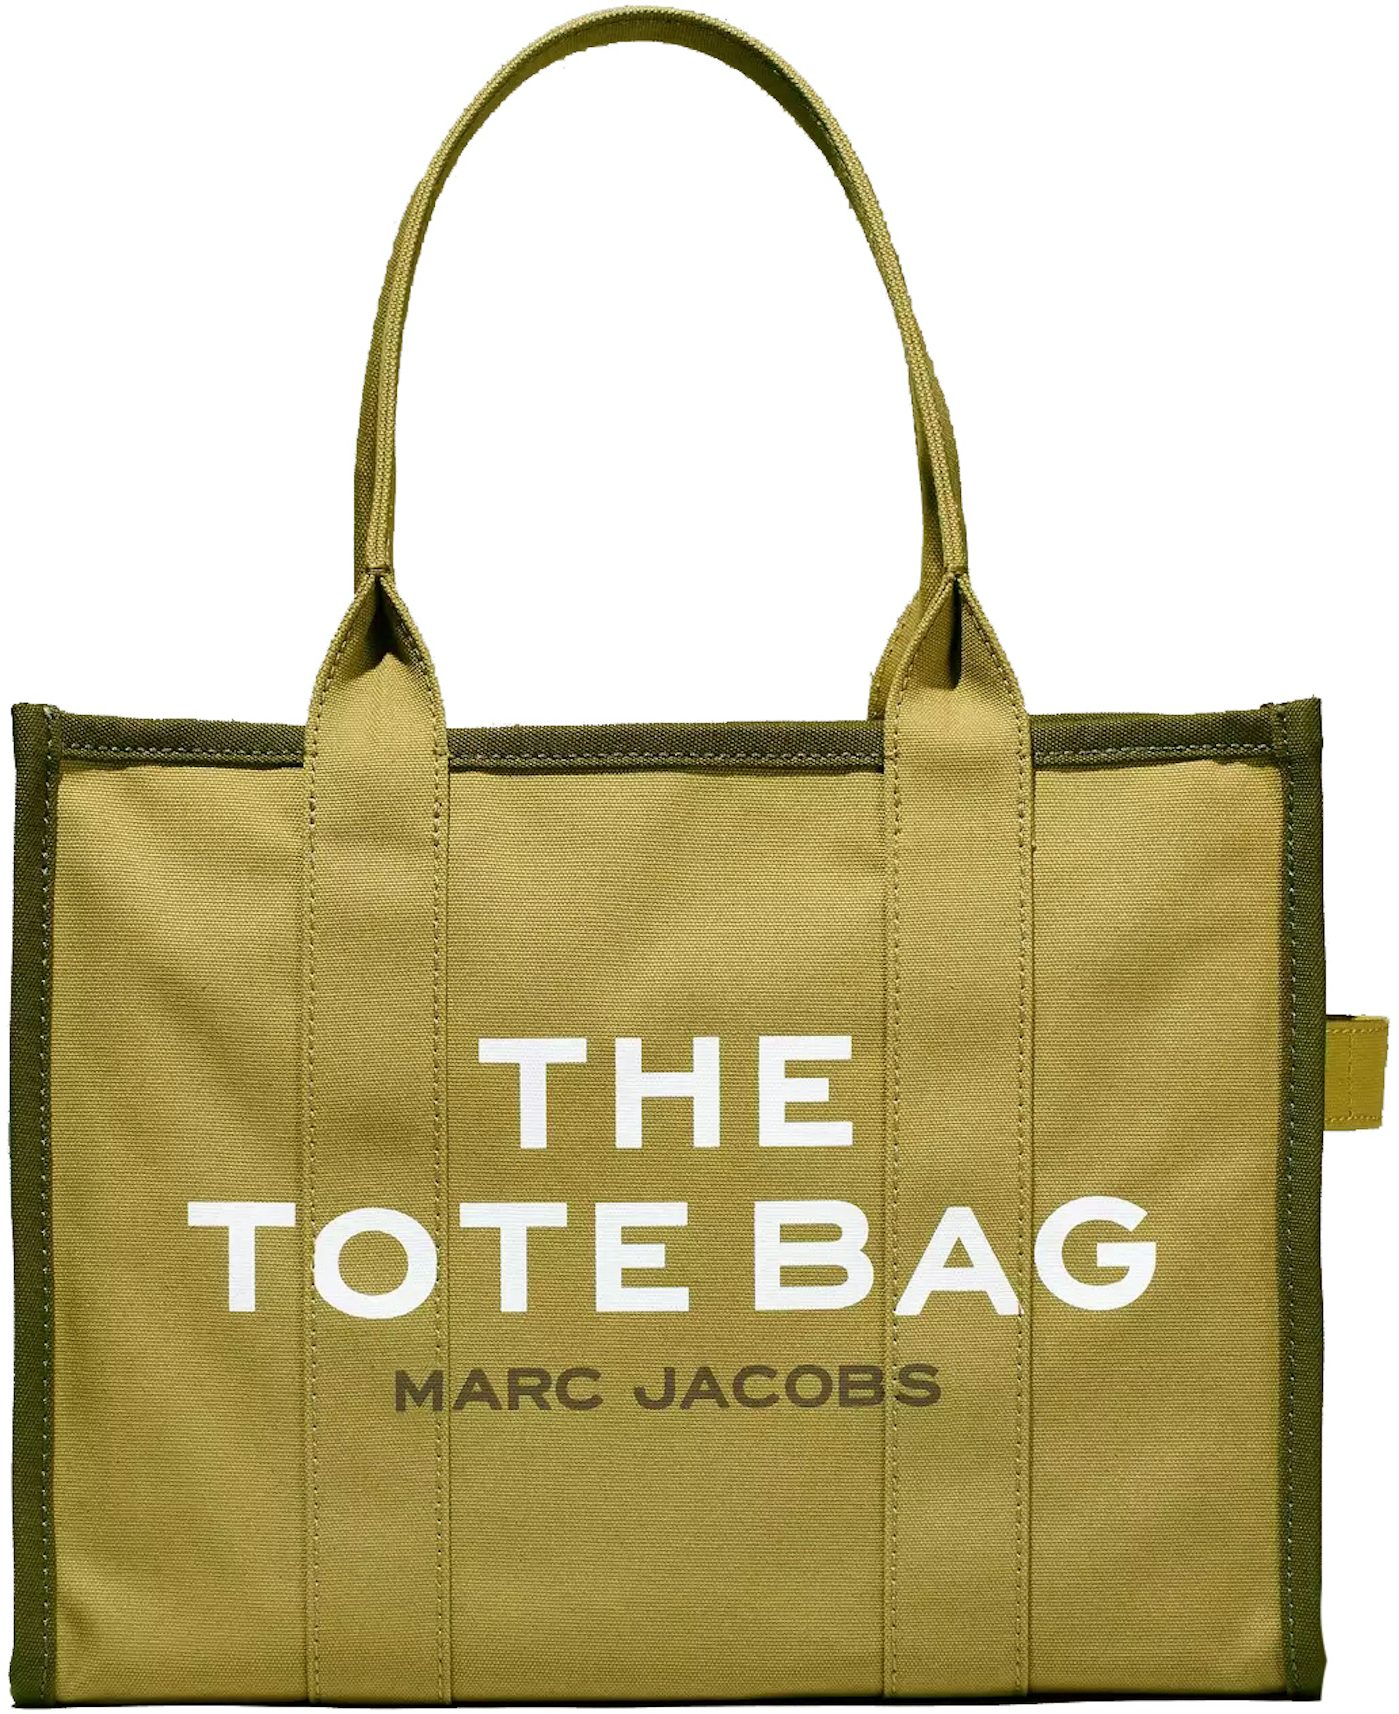 The Large Canvas Tote Bag in Blue - Marc Jacobs